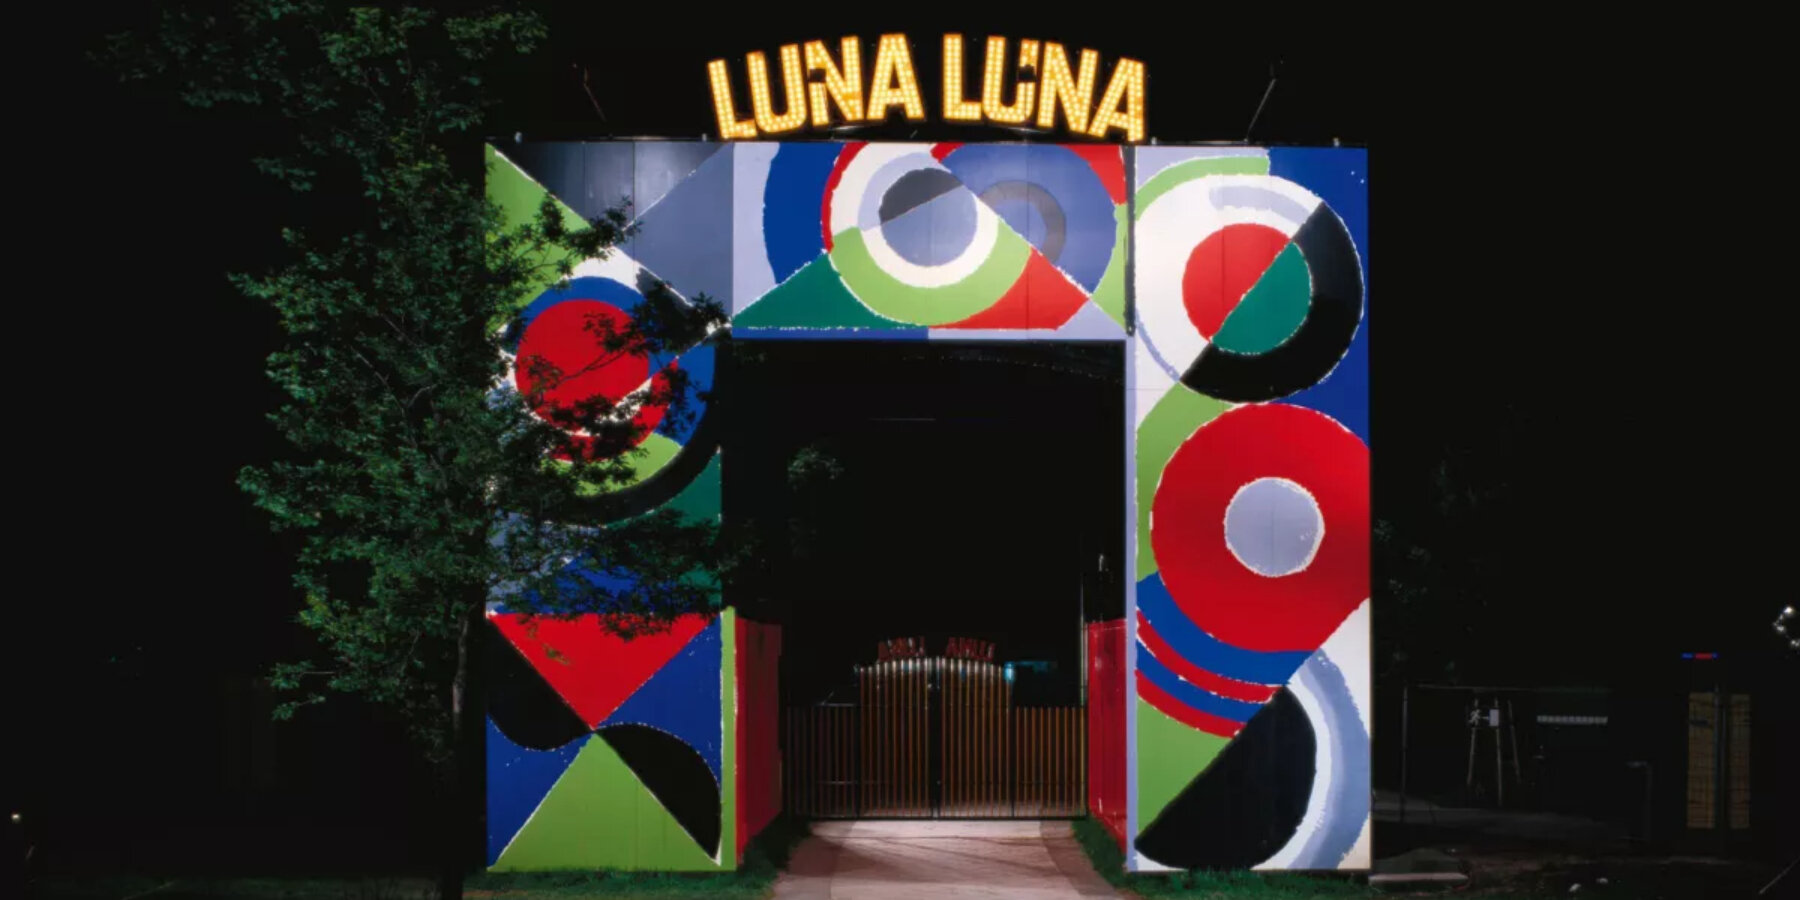 luna luna, the world's first traveling art carnival, returns with works